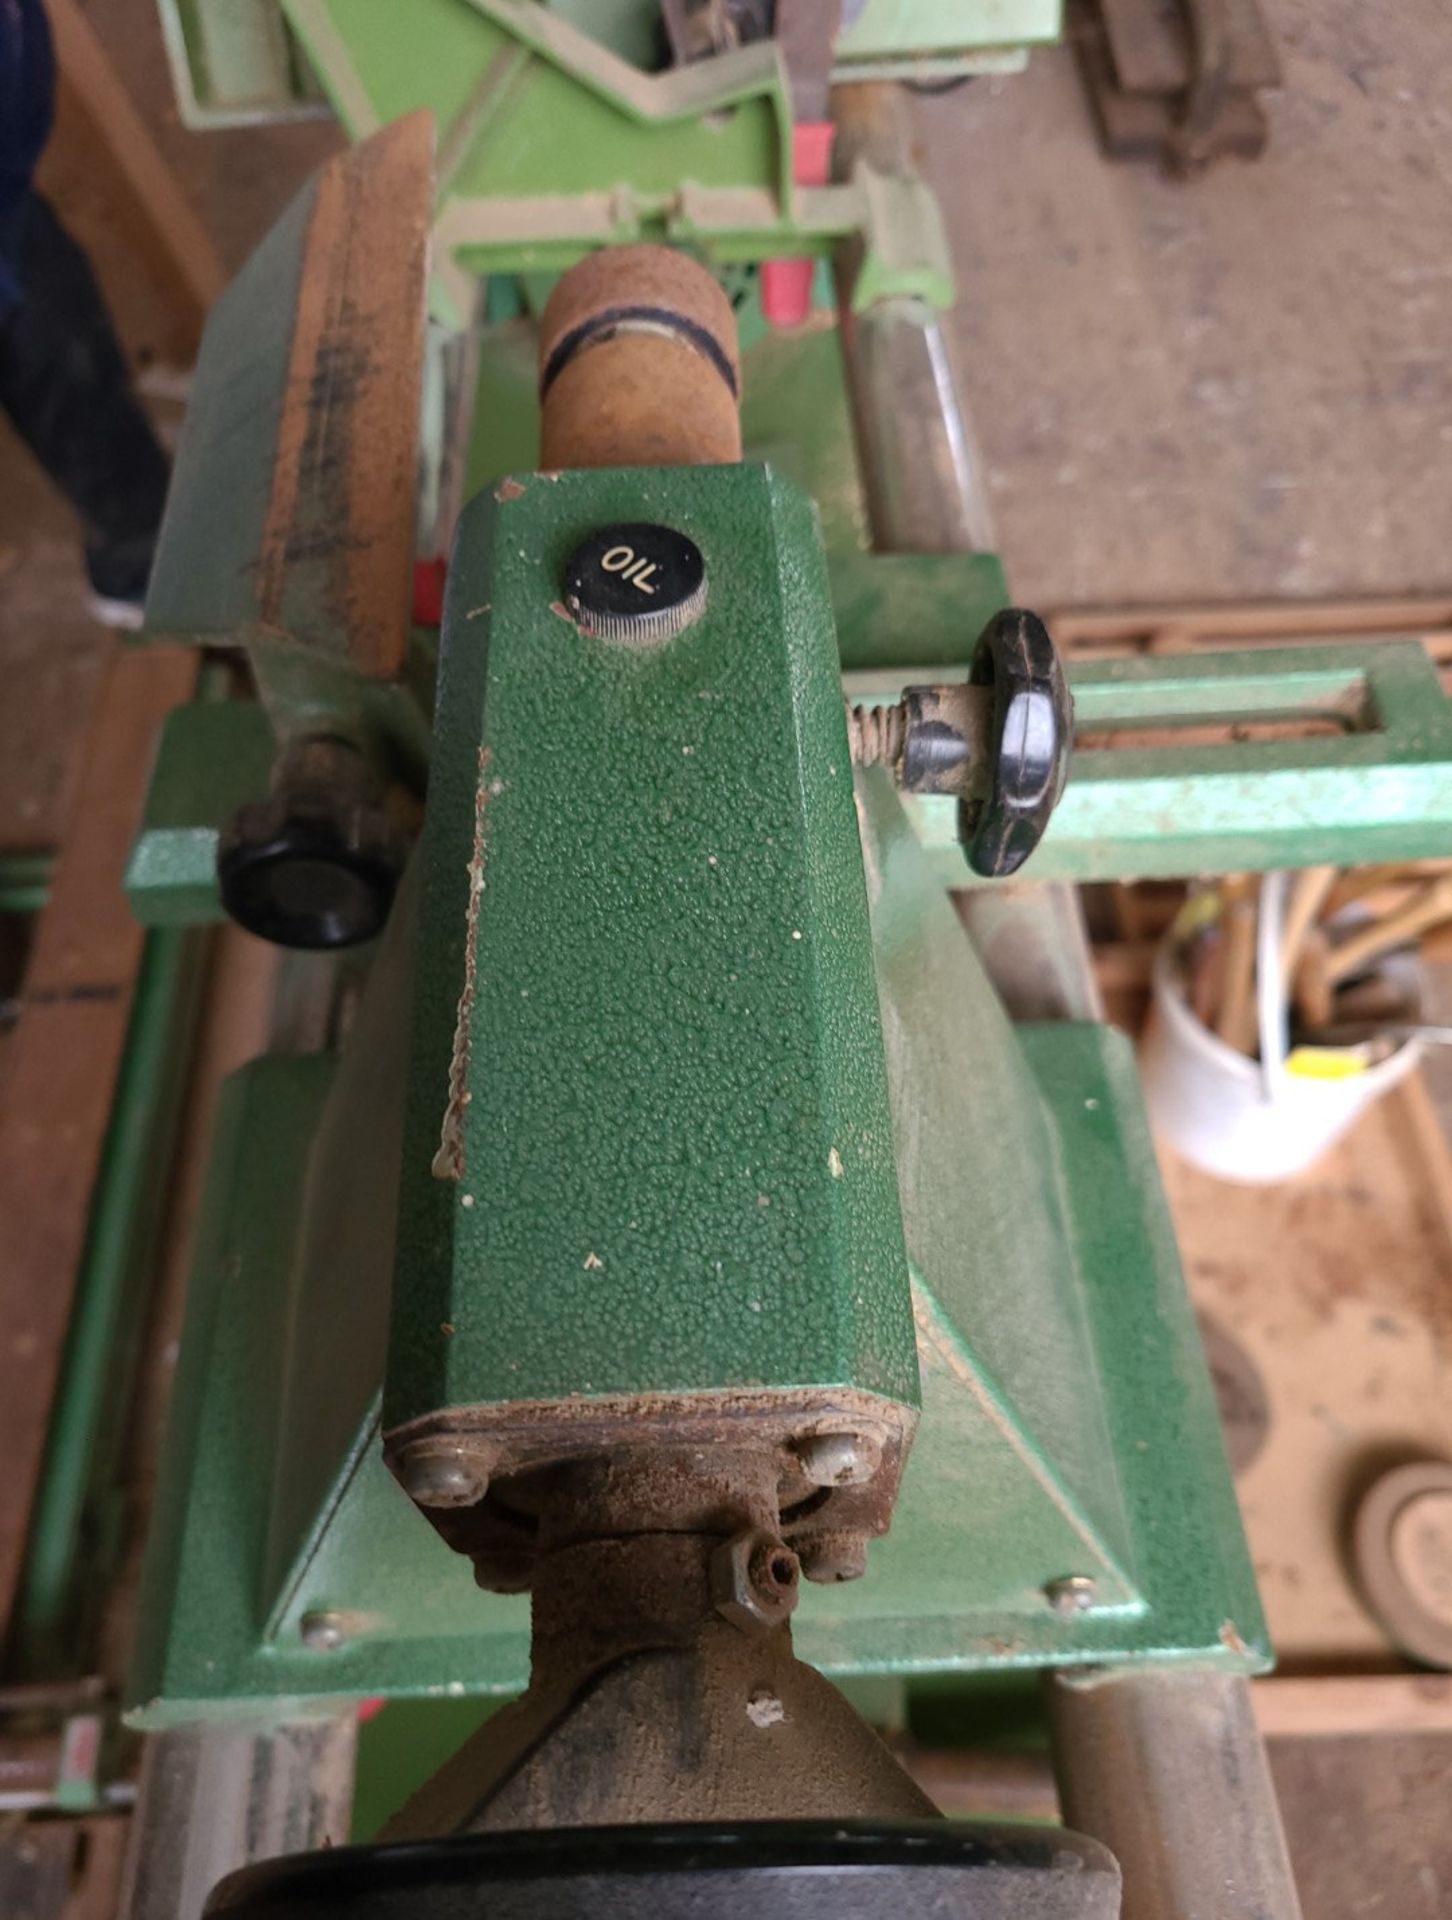 1 x Lathe With Copying Table + Accessories - Ref: CNT221 - CL846 - Location: Oxford OX2 - Image 3 of 24